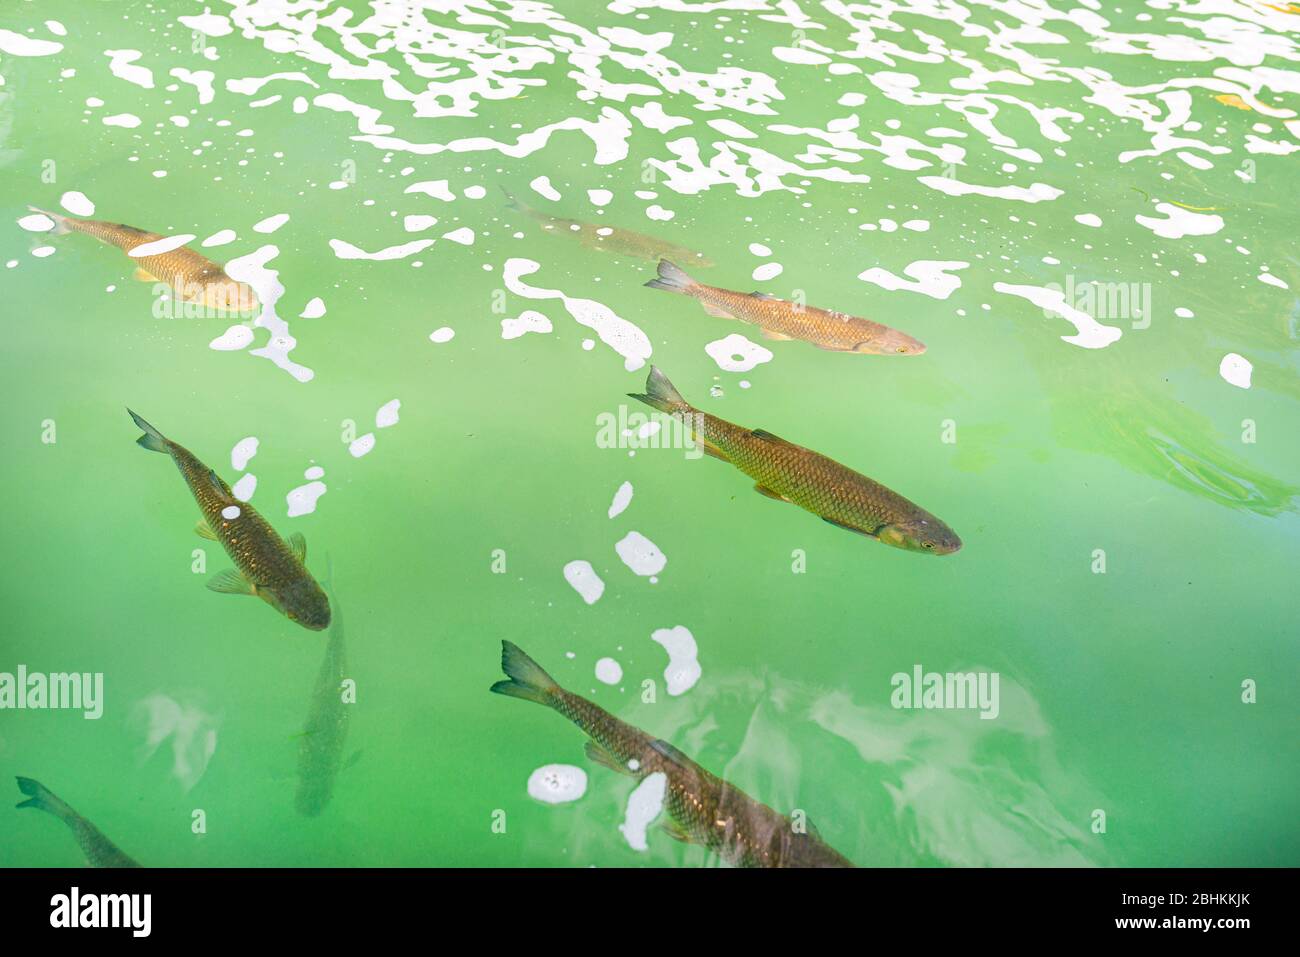 A group of large fish swimming in beautiful, transparent turquoise water. Stock Photo